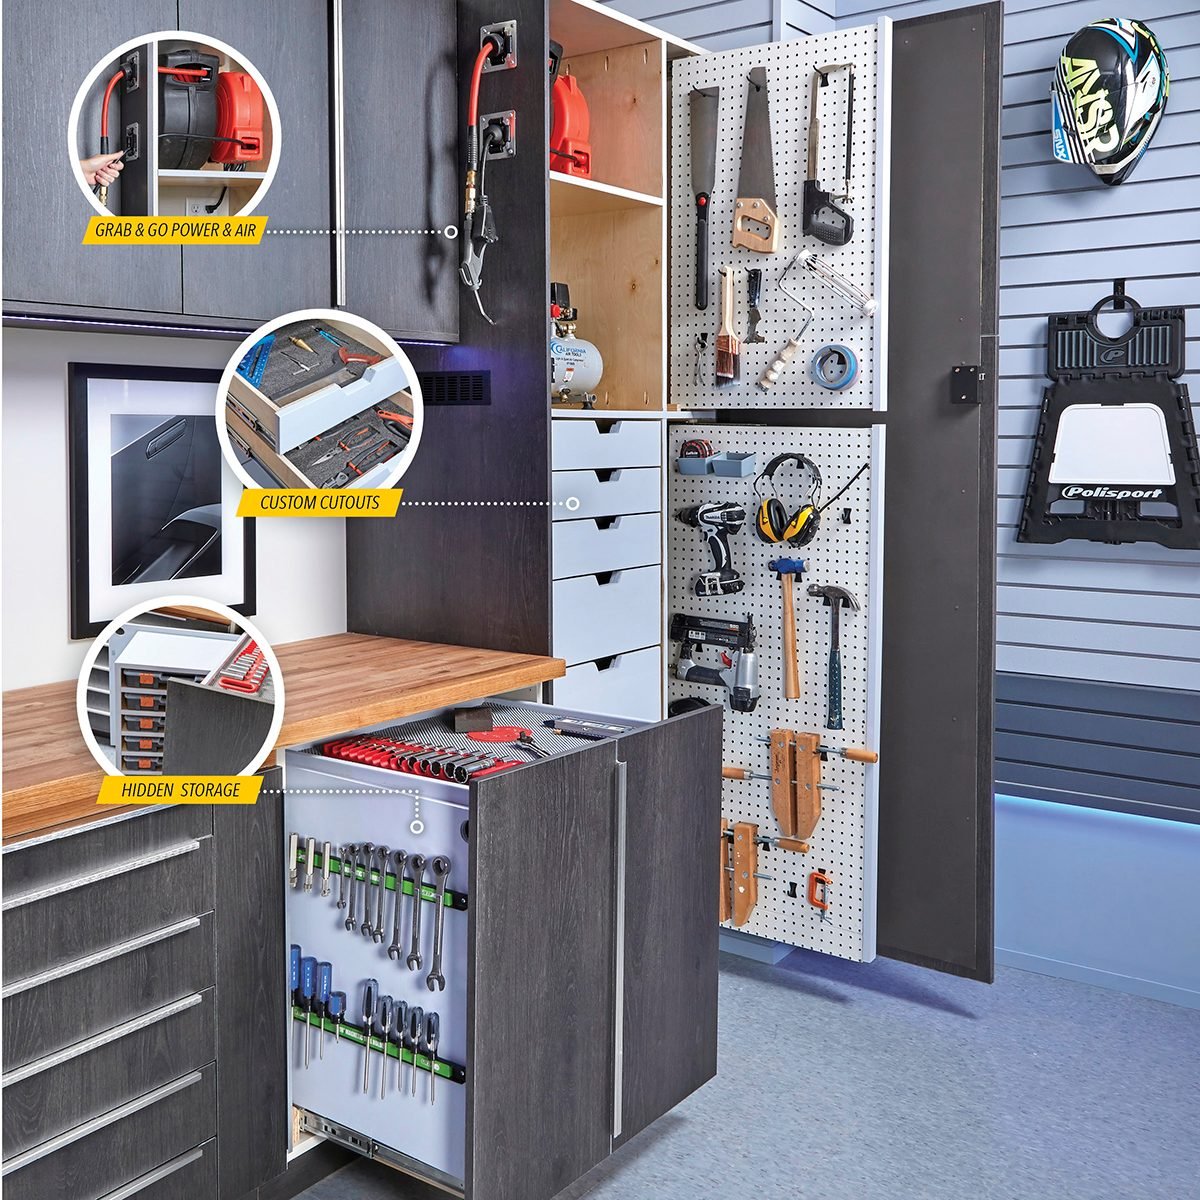 How to Customize Garage Cabinets for More Storage (DIY) | Family Handyman